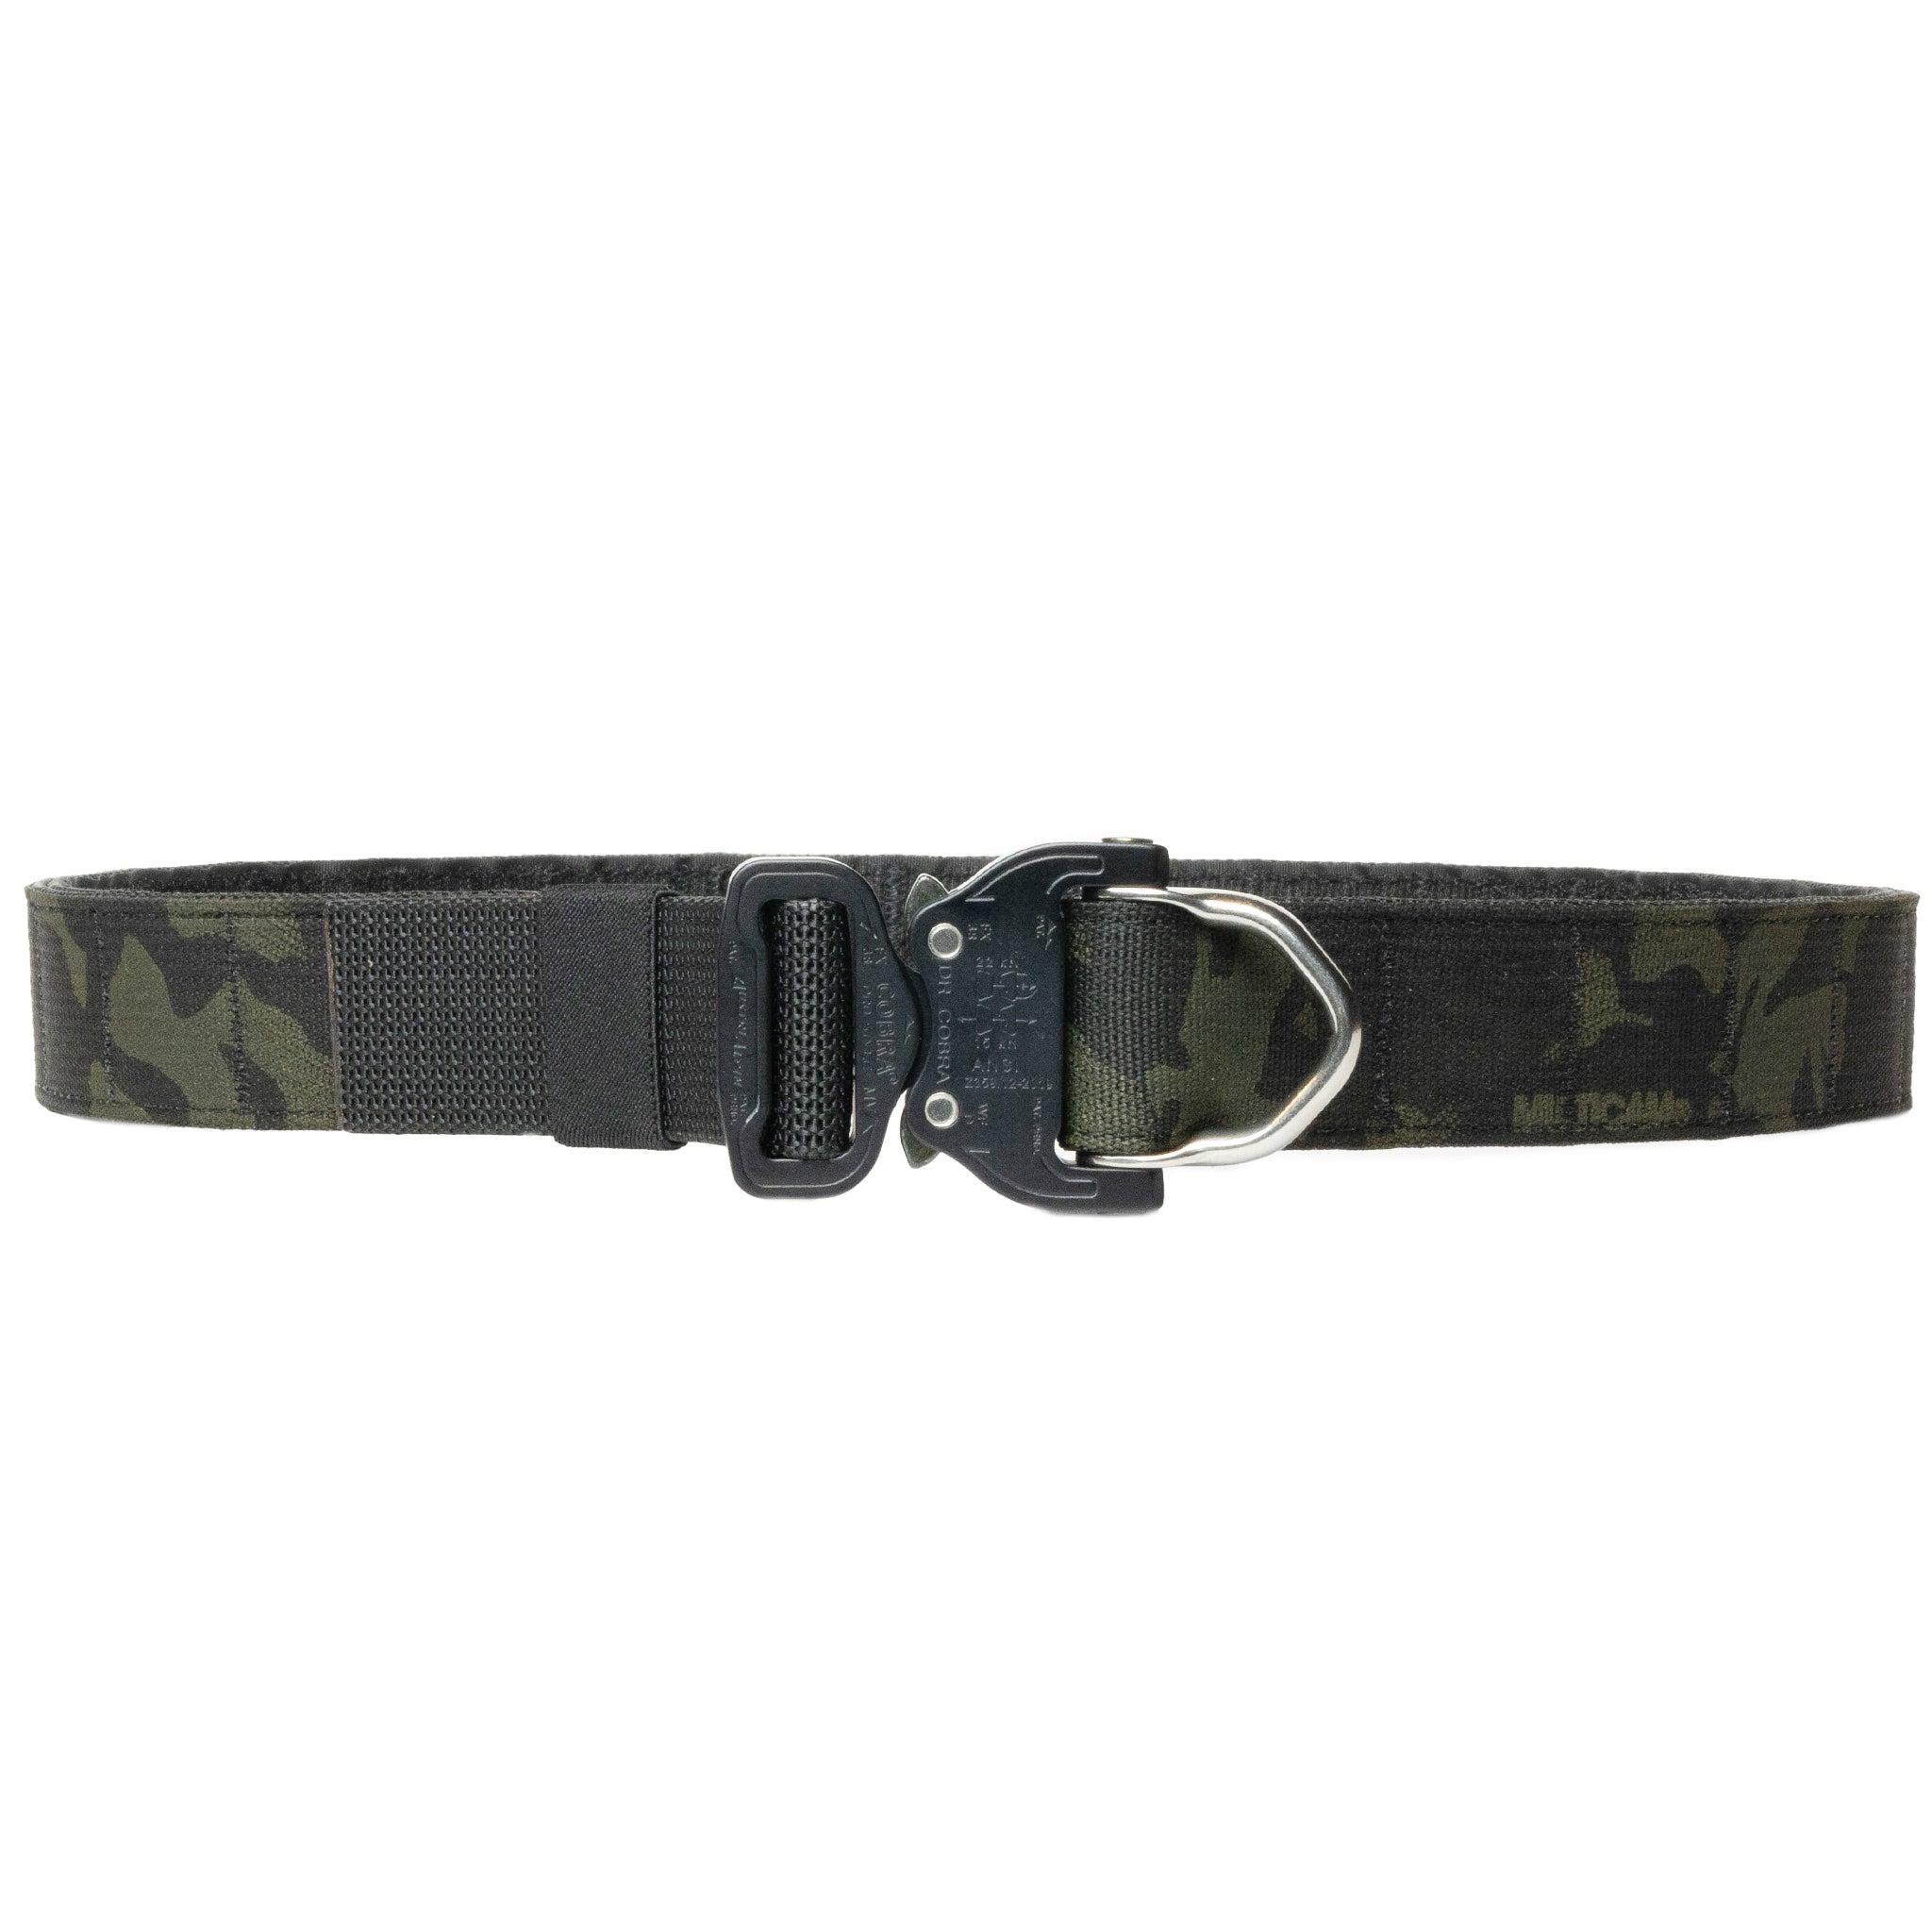 Ciguera Gear Company Battlewagon War Belt in Multicam Black that is the ideal choice as a duty belt. It's made in the USA and uses licensed Multicam Black webbing from Crye Precision. The Buckle is a Austri Alpin Cobra buckle.